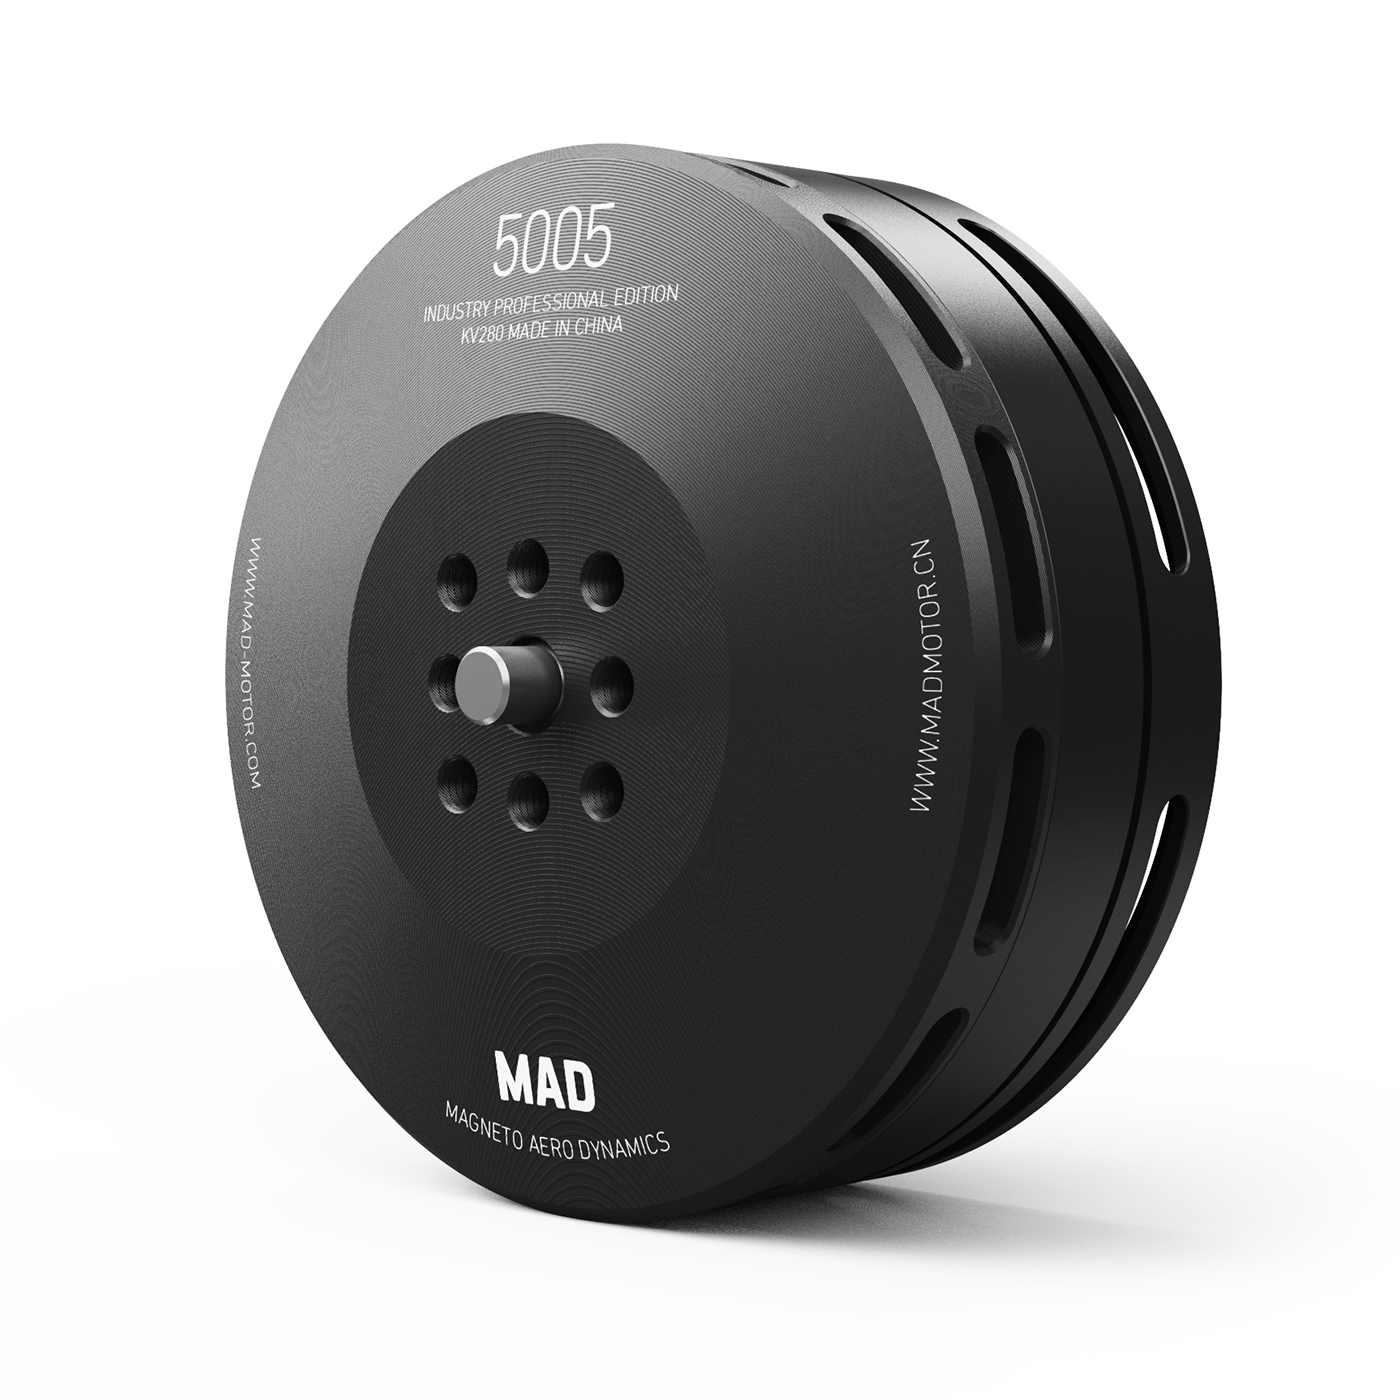 MAD 5005 IPE brushless motor for the long-range inspection drone mapping drone surveying drone quadcopter hexcopter mulitirotor